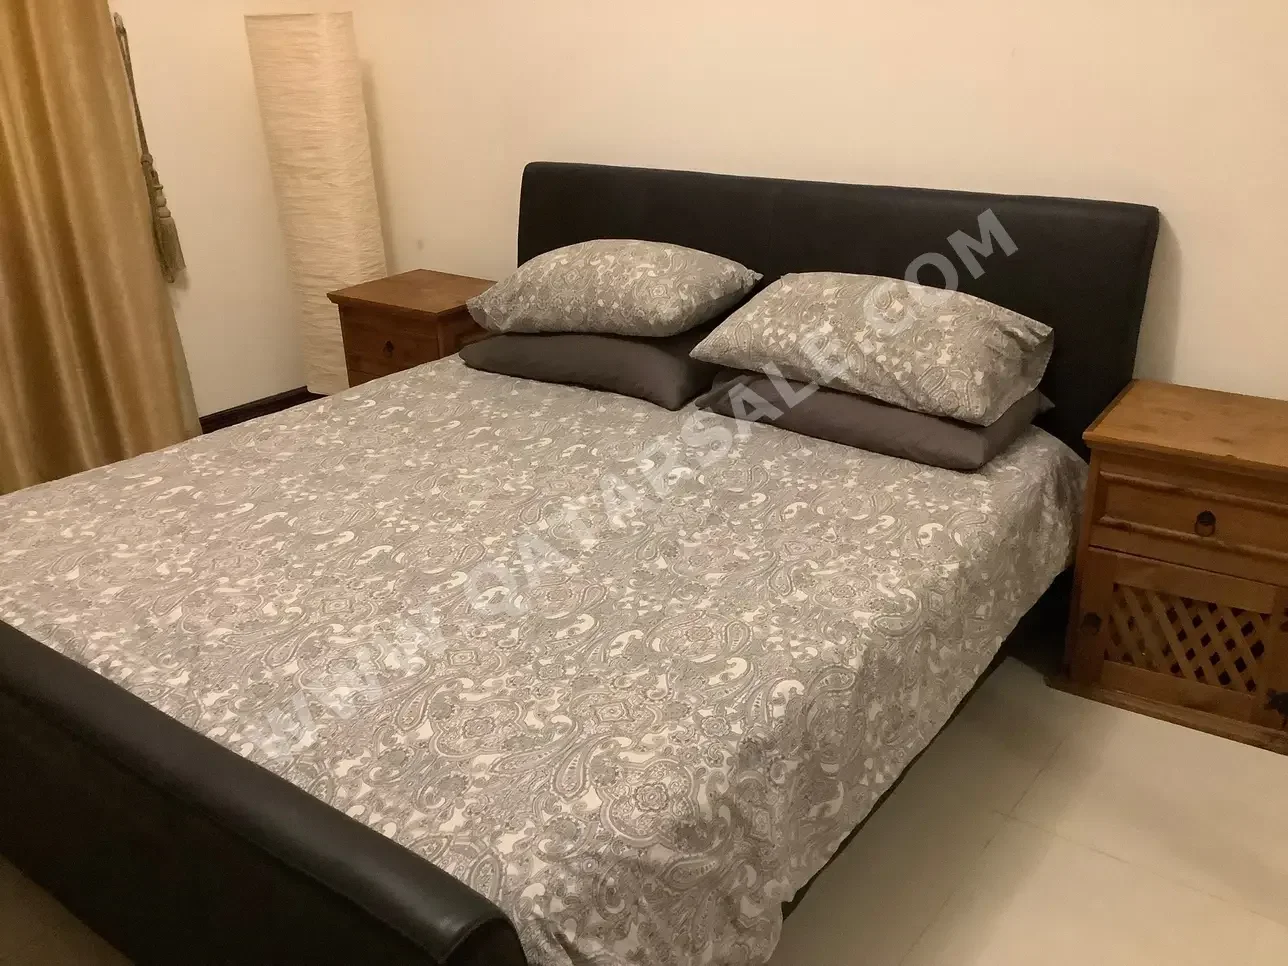 Beds King  Black  Mattress Included  With Bedside Table